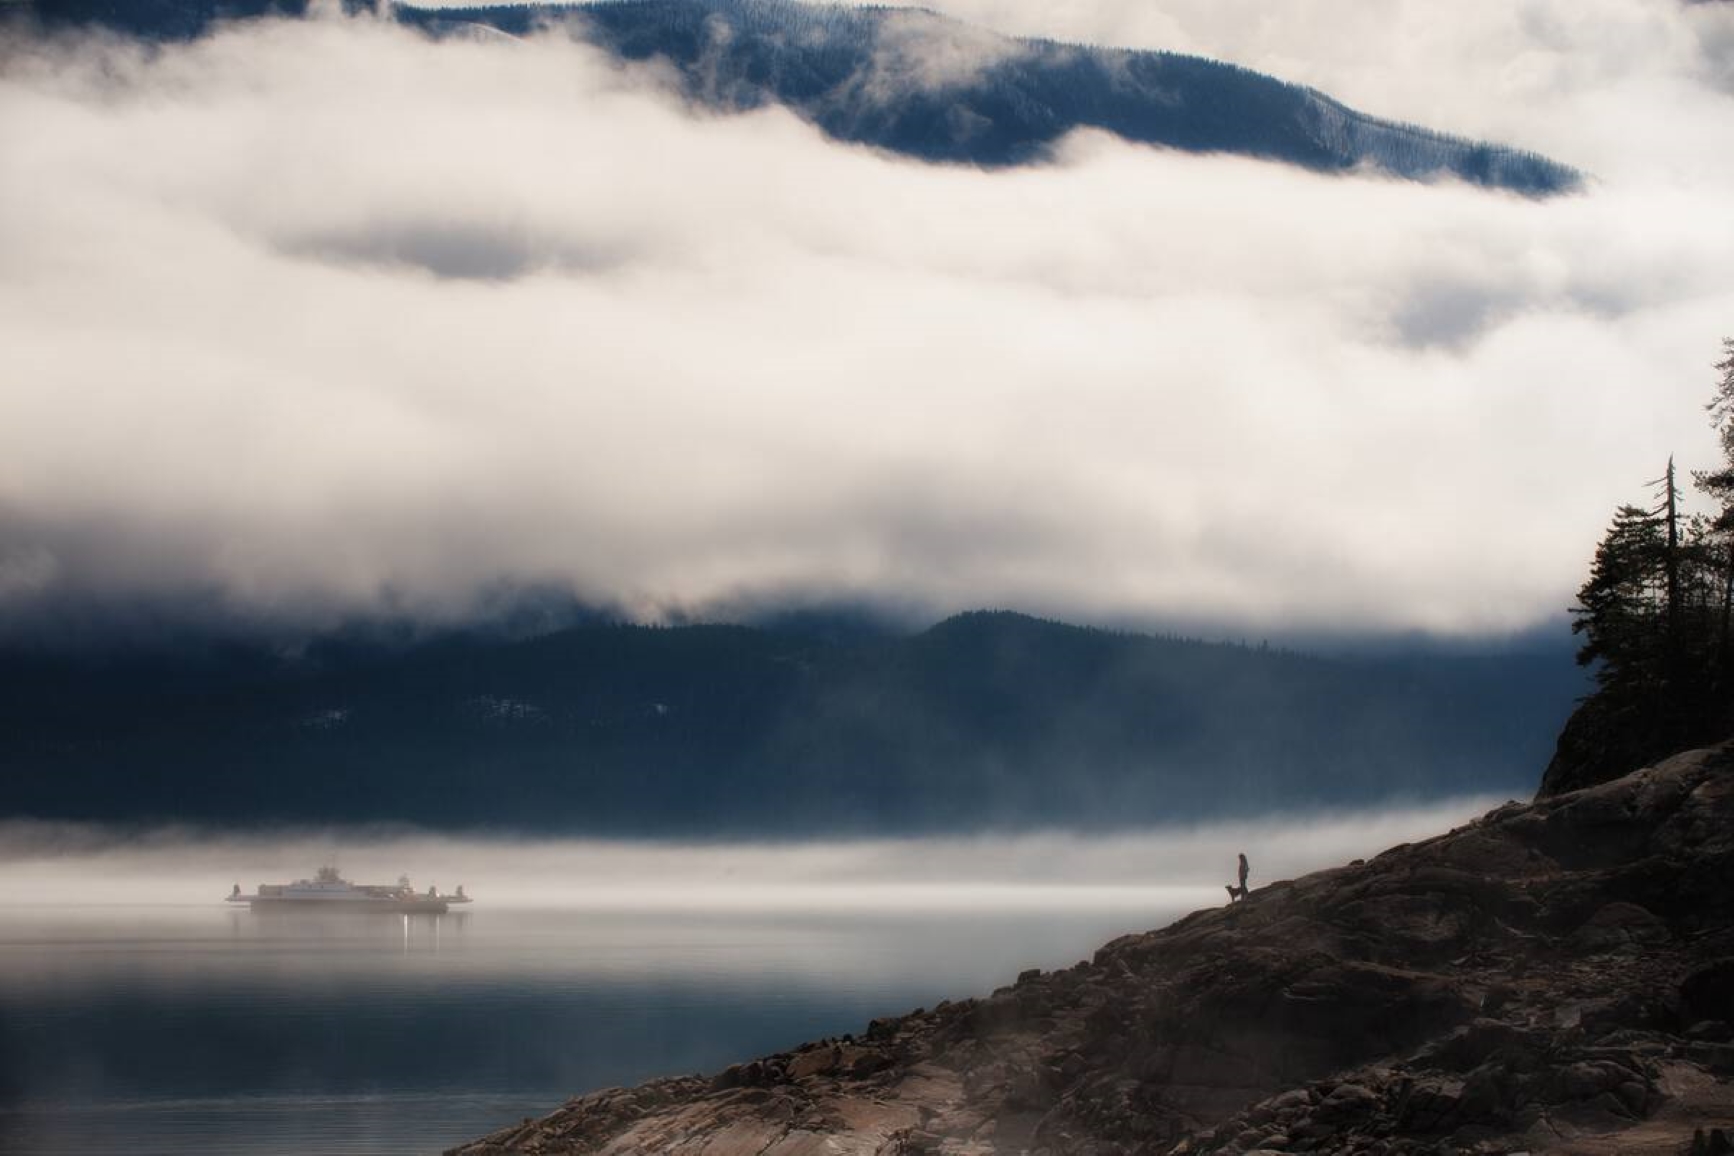 Arrow Lake in the foggy distance, from a mountain top view. Photo credit: Destination BC